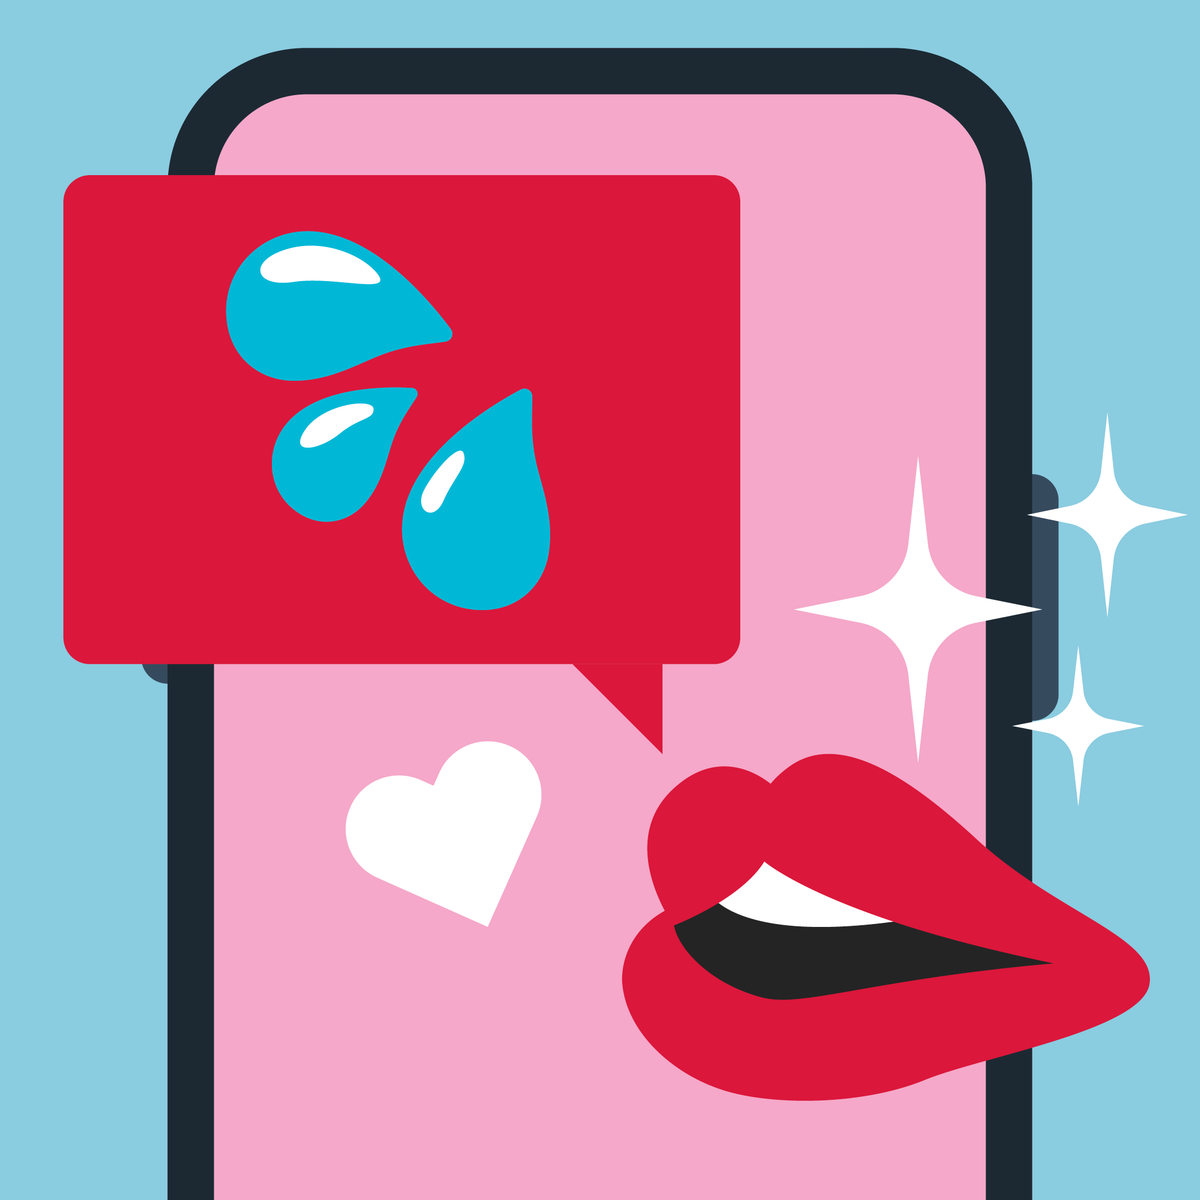 Free Smoll Chut - How To Sext - 60 Dirty Texting Tips And Examples From Experts